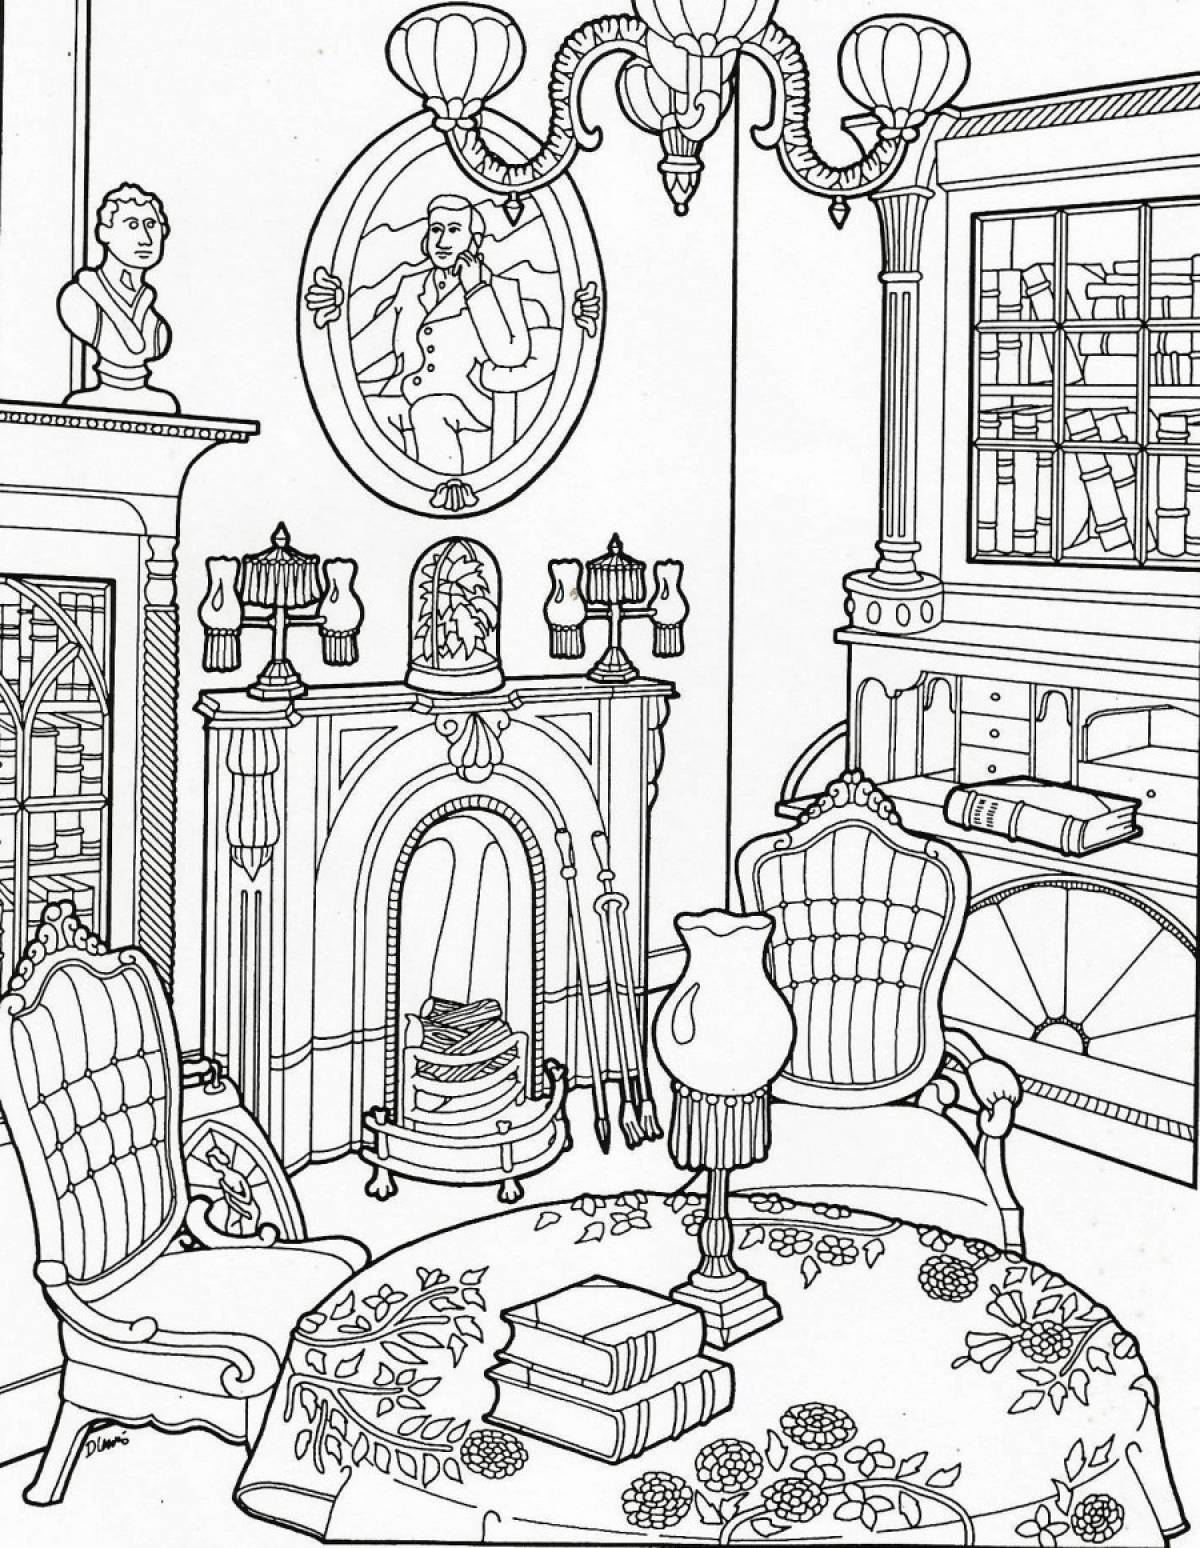 Outlandish room eater coloring page